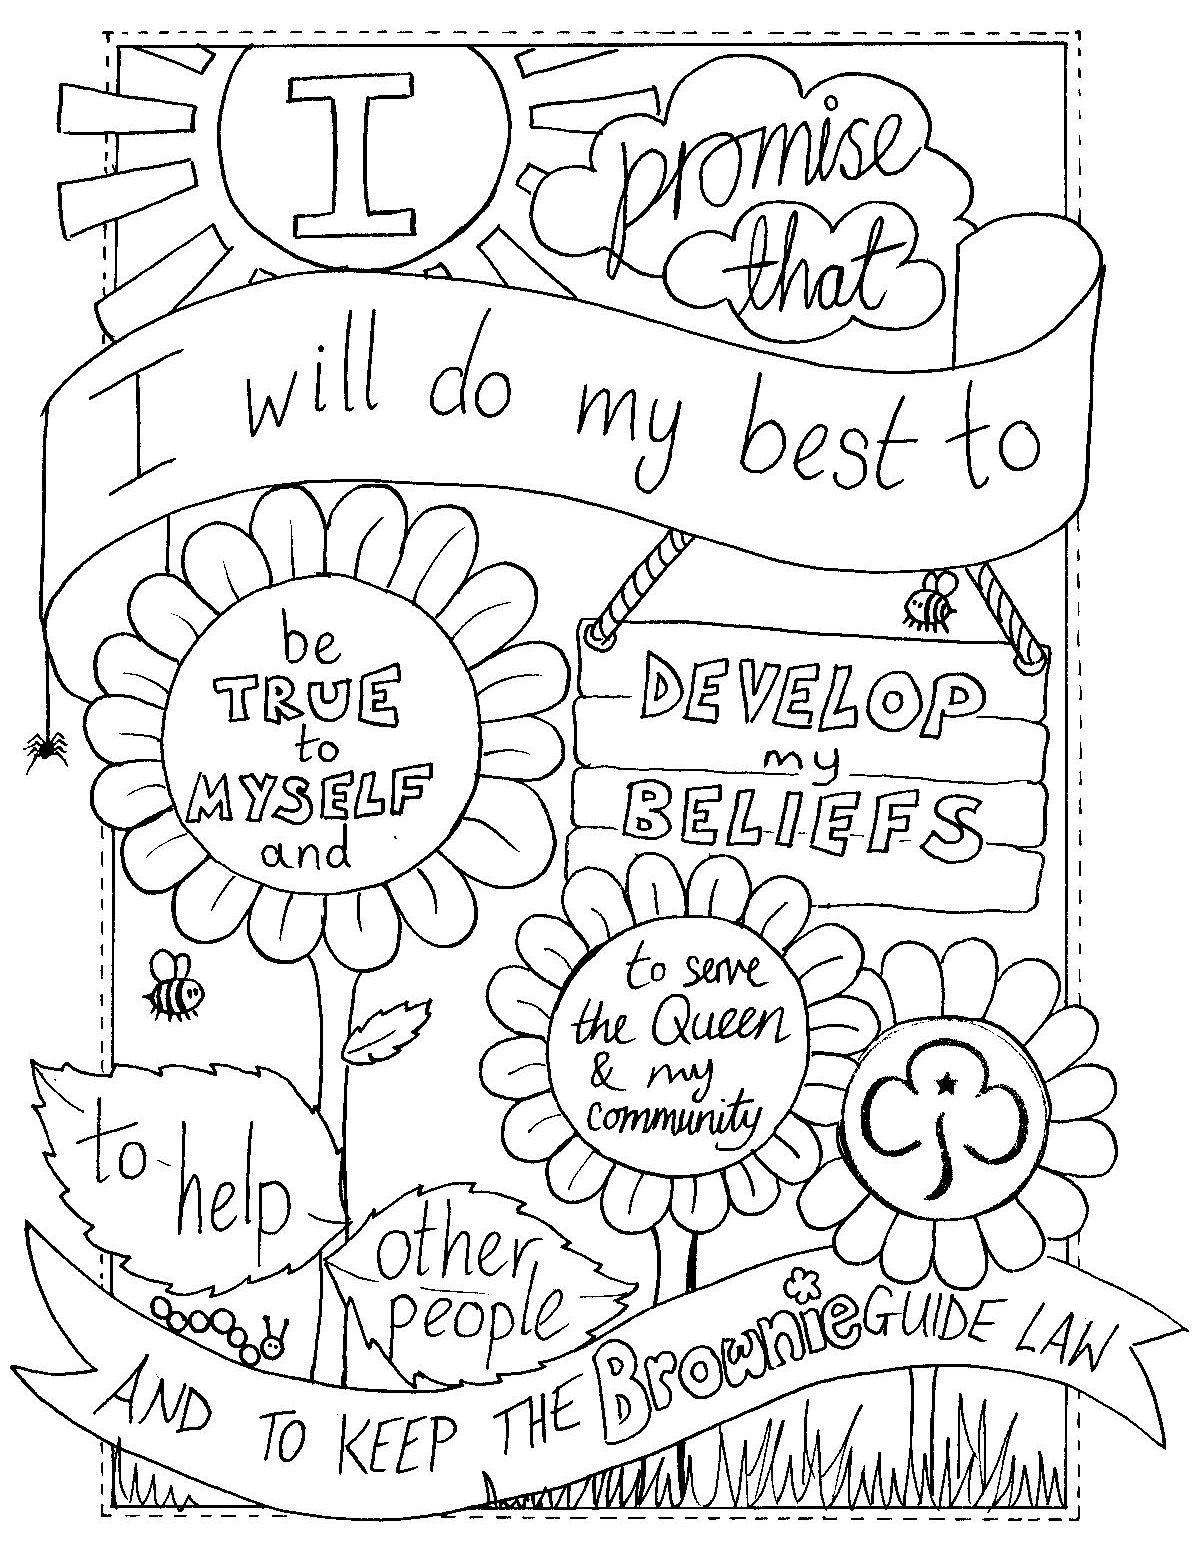 Girl Scout Law Coloring Pages Brownies
 UK Brownie Promise colouring sheet Created by emyb Emy